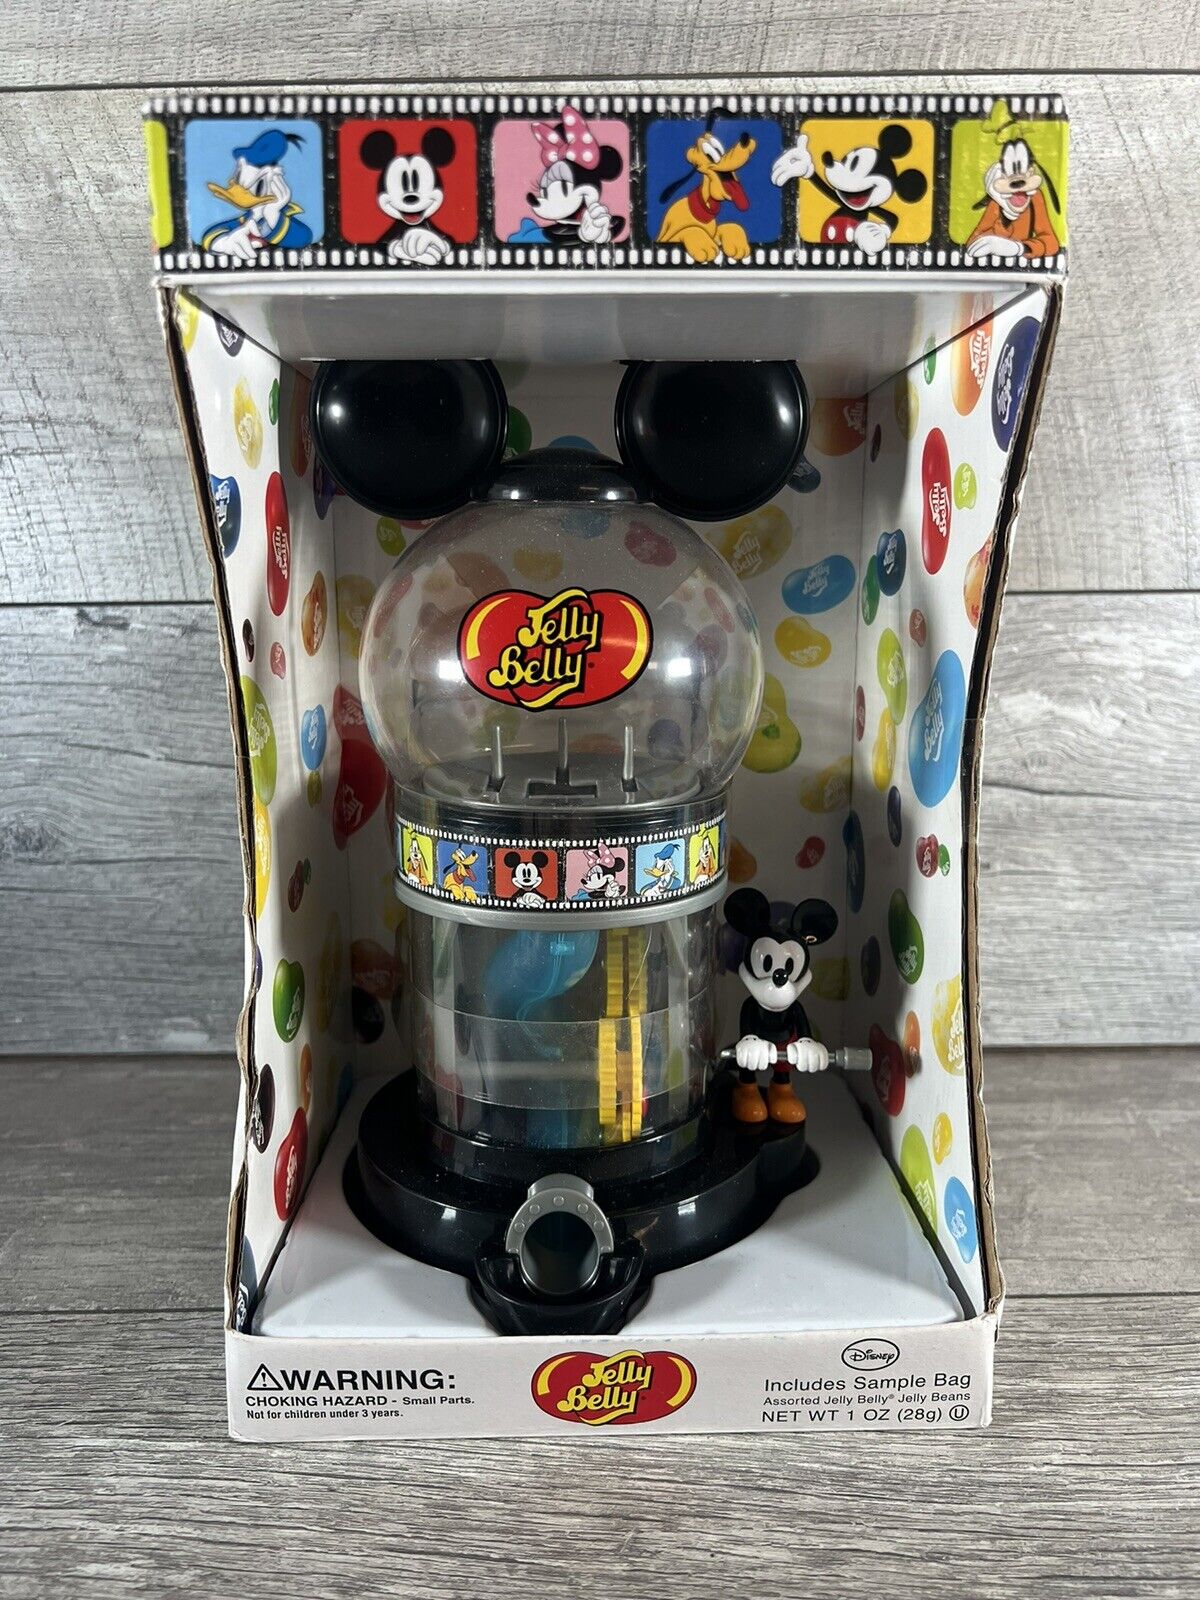 Jelly Belly Disney Mickey Mouse Bean Dispenser Machine Collector Item New In Box